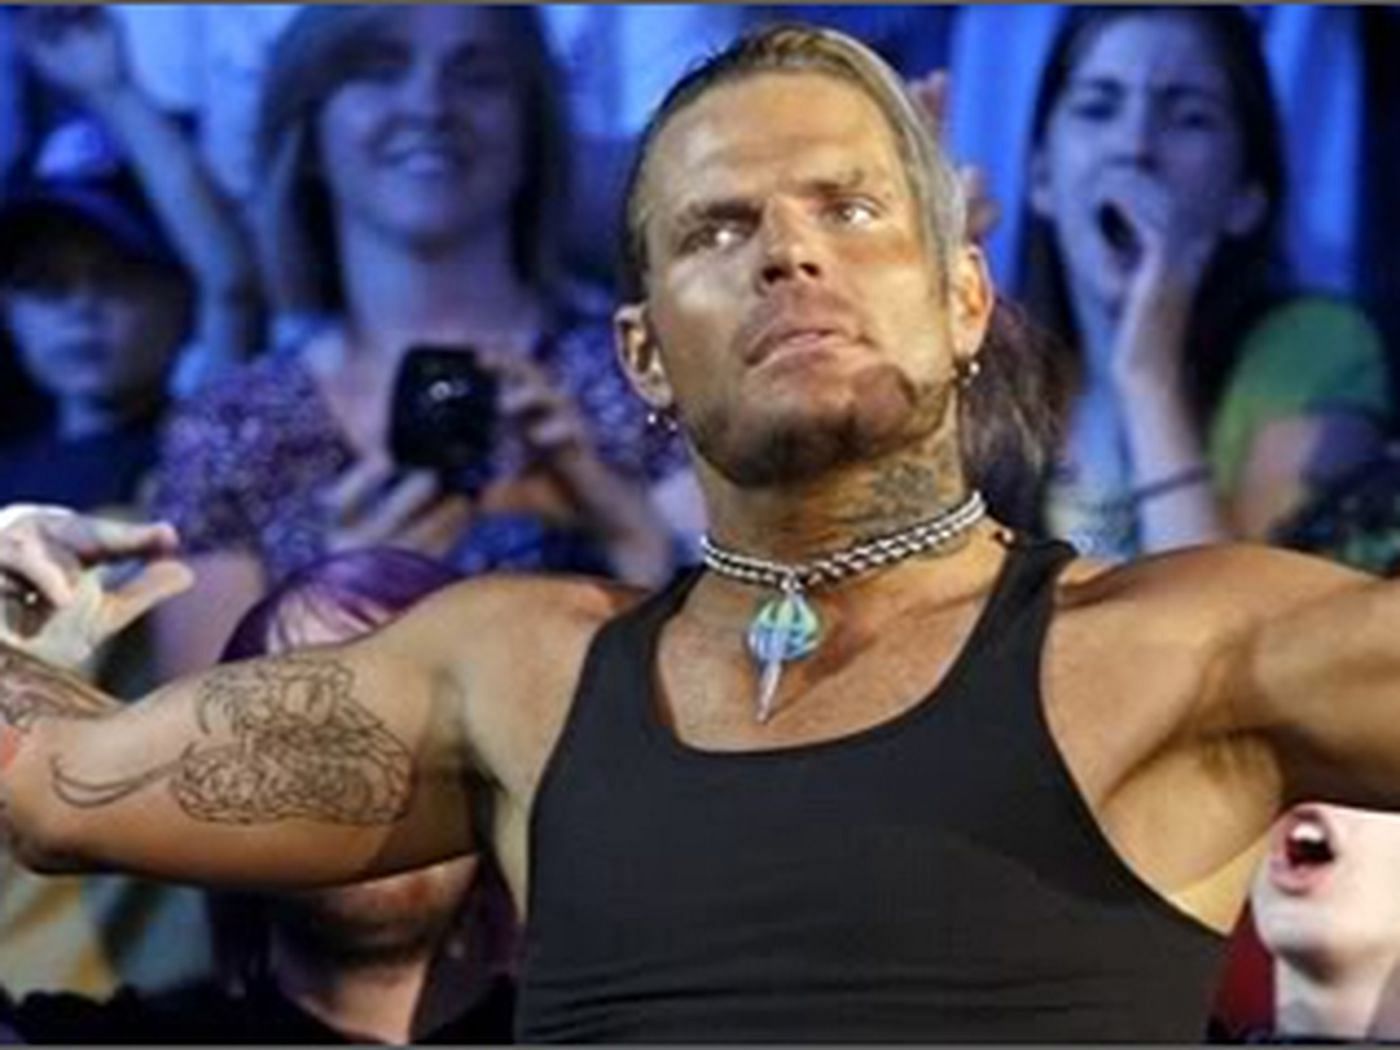 “SWAT team comes into my house... I was busted.” Jeff Hardy details 2009 arrest